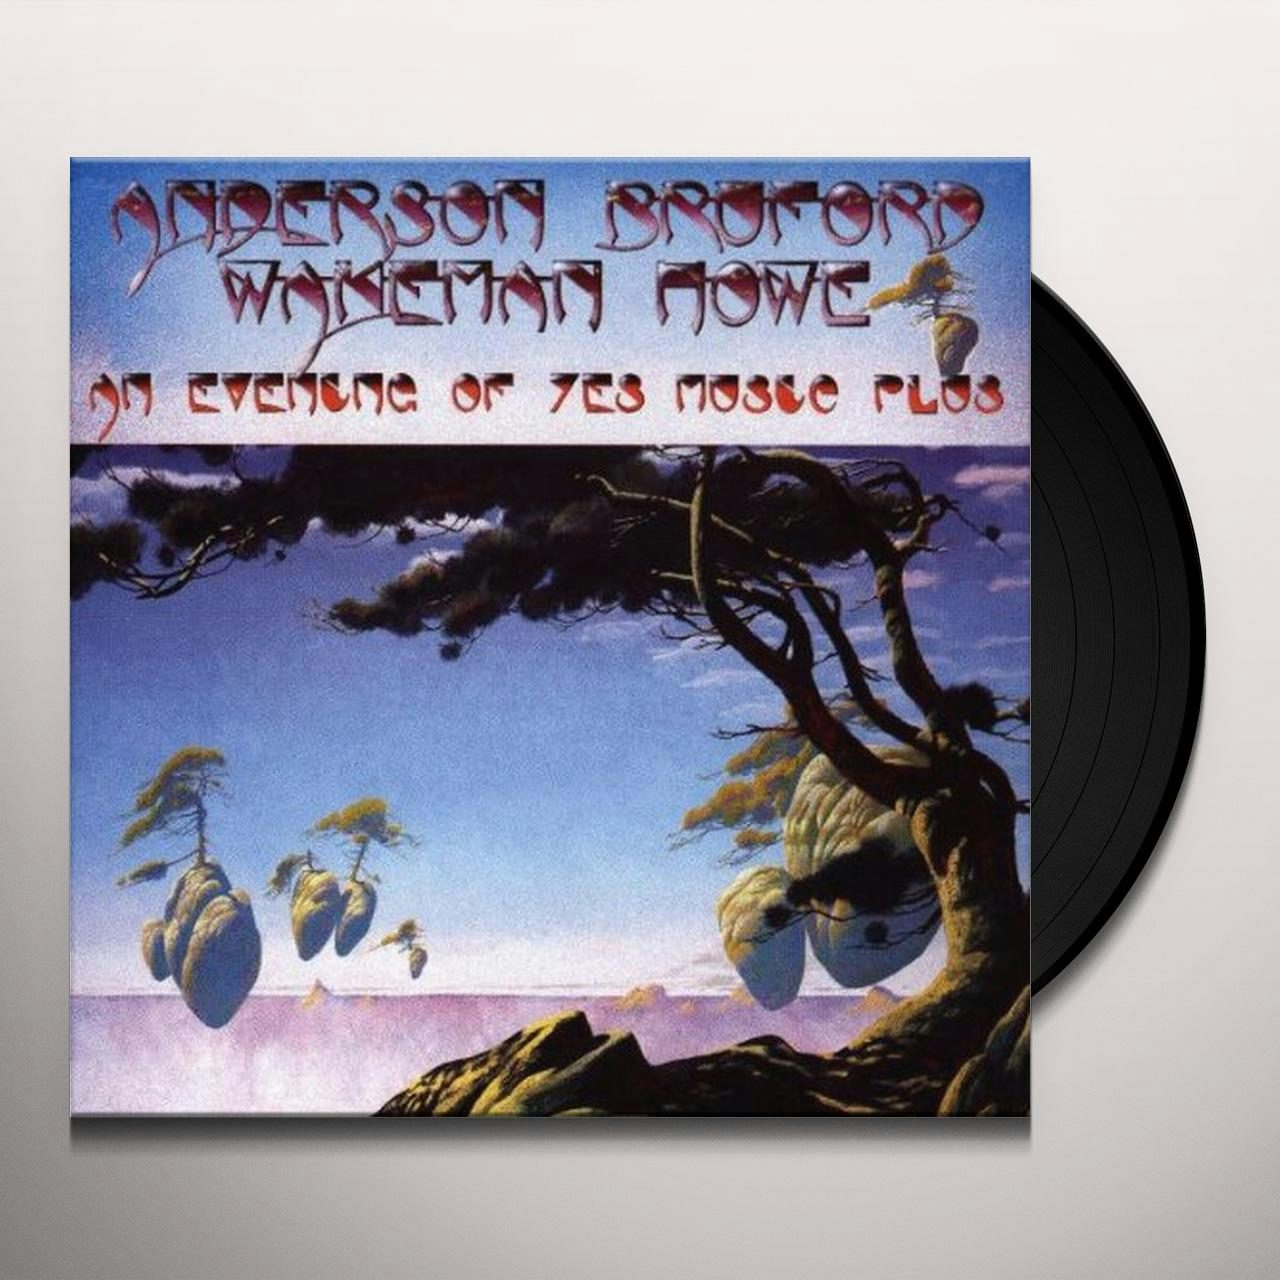 Anderson Bruford Wakeman Howe AN EVENING OF YES MUSIC 2 Vinyl Record